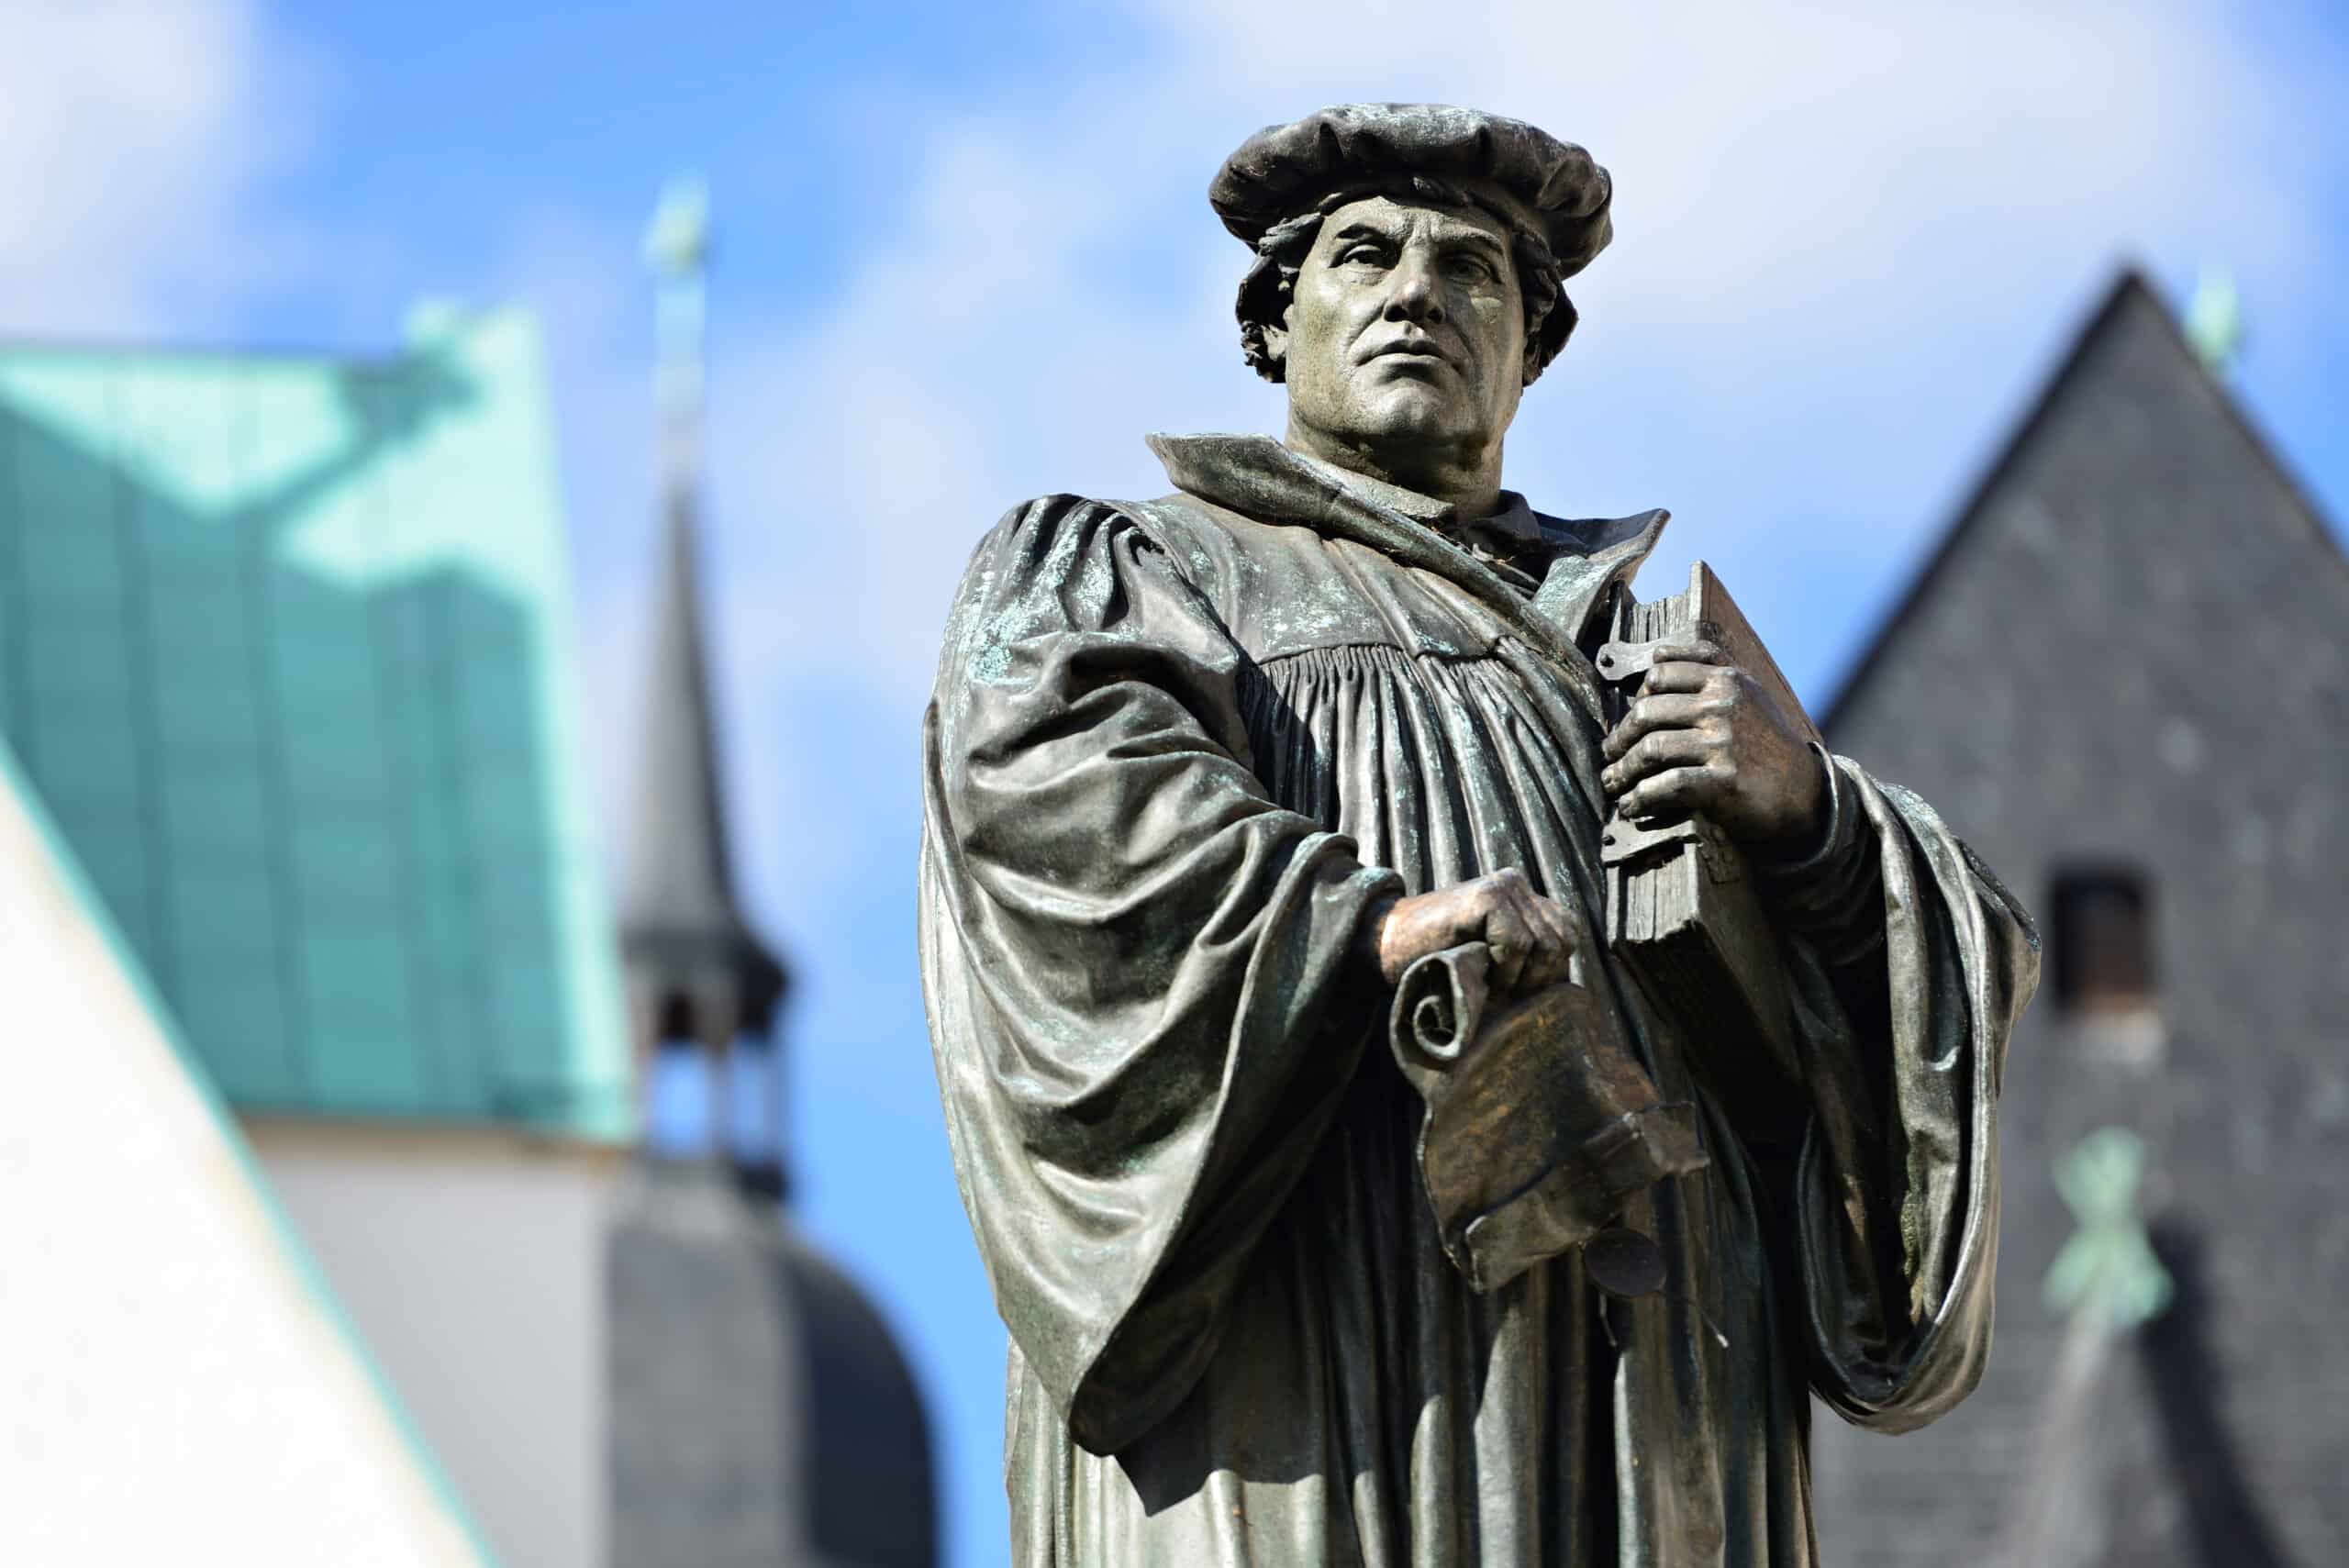 Martin LUther